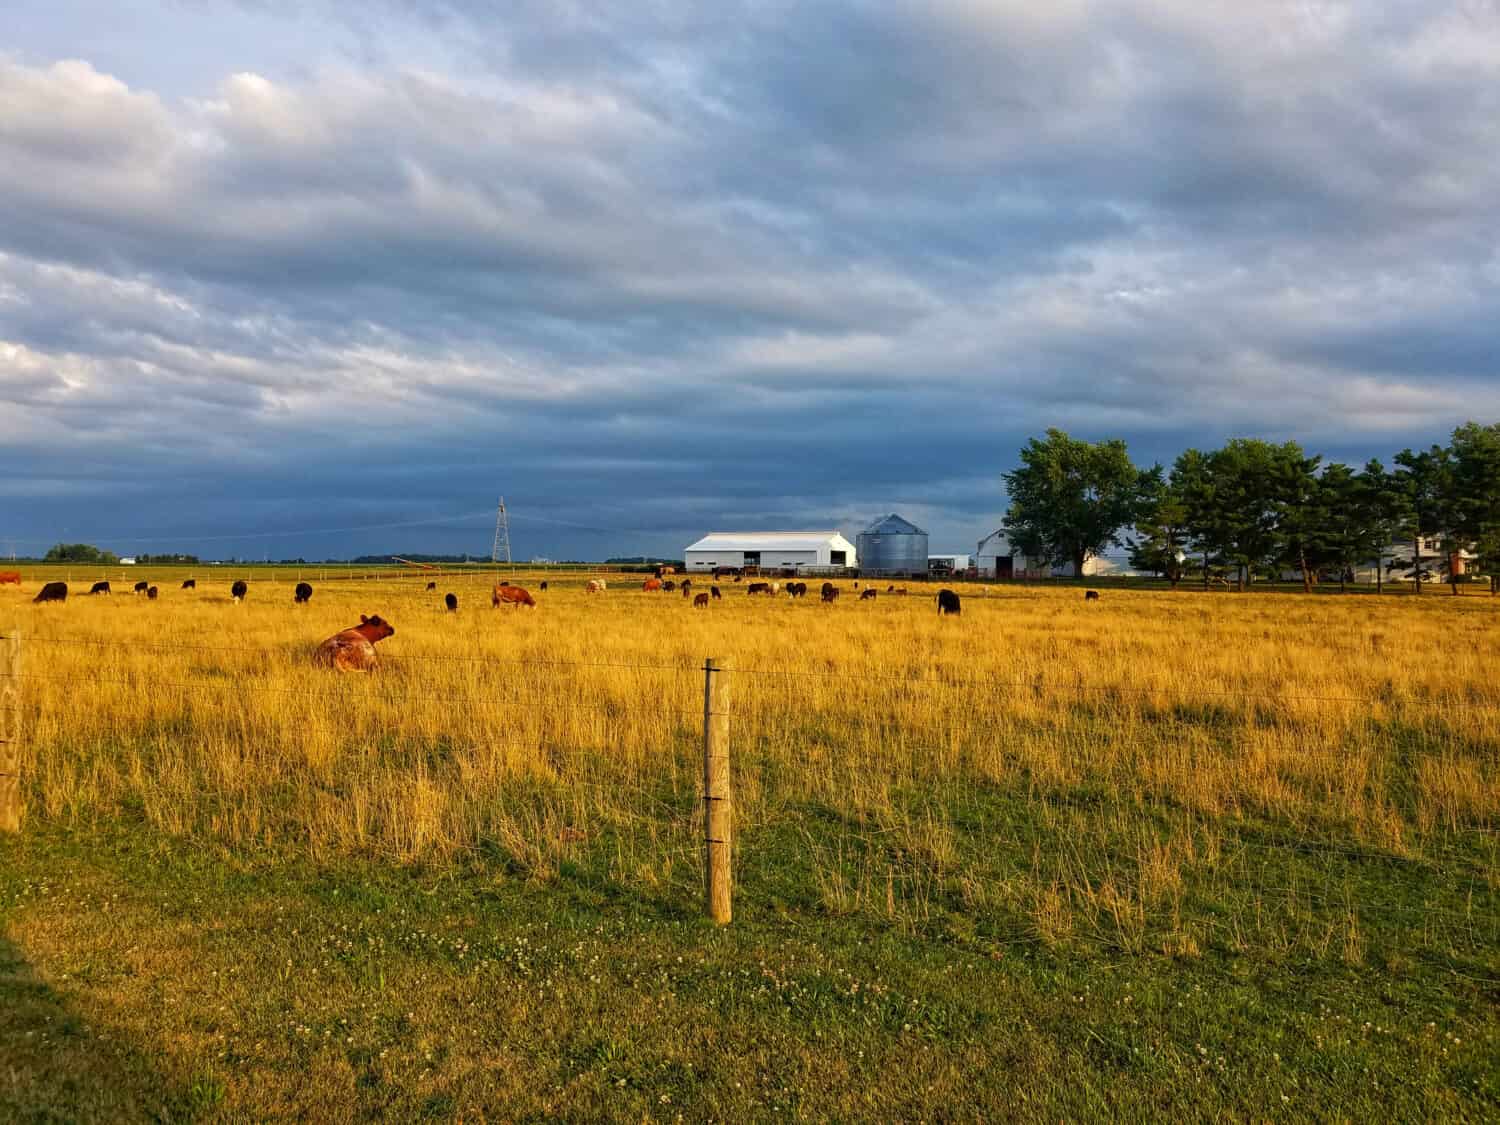 Hancock county , field of grazing cows right before the approaching storm.